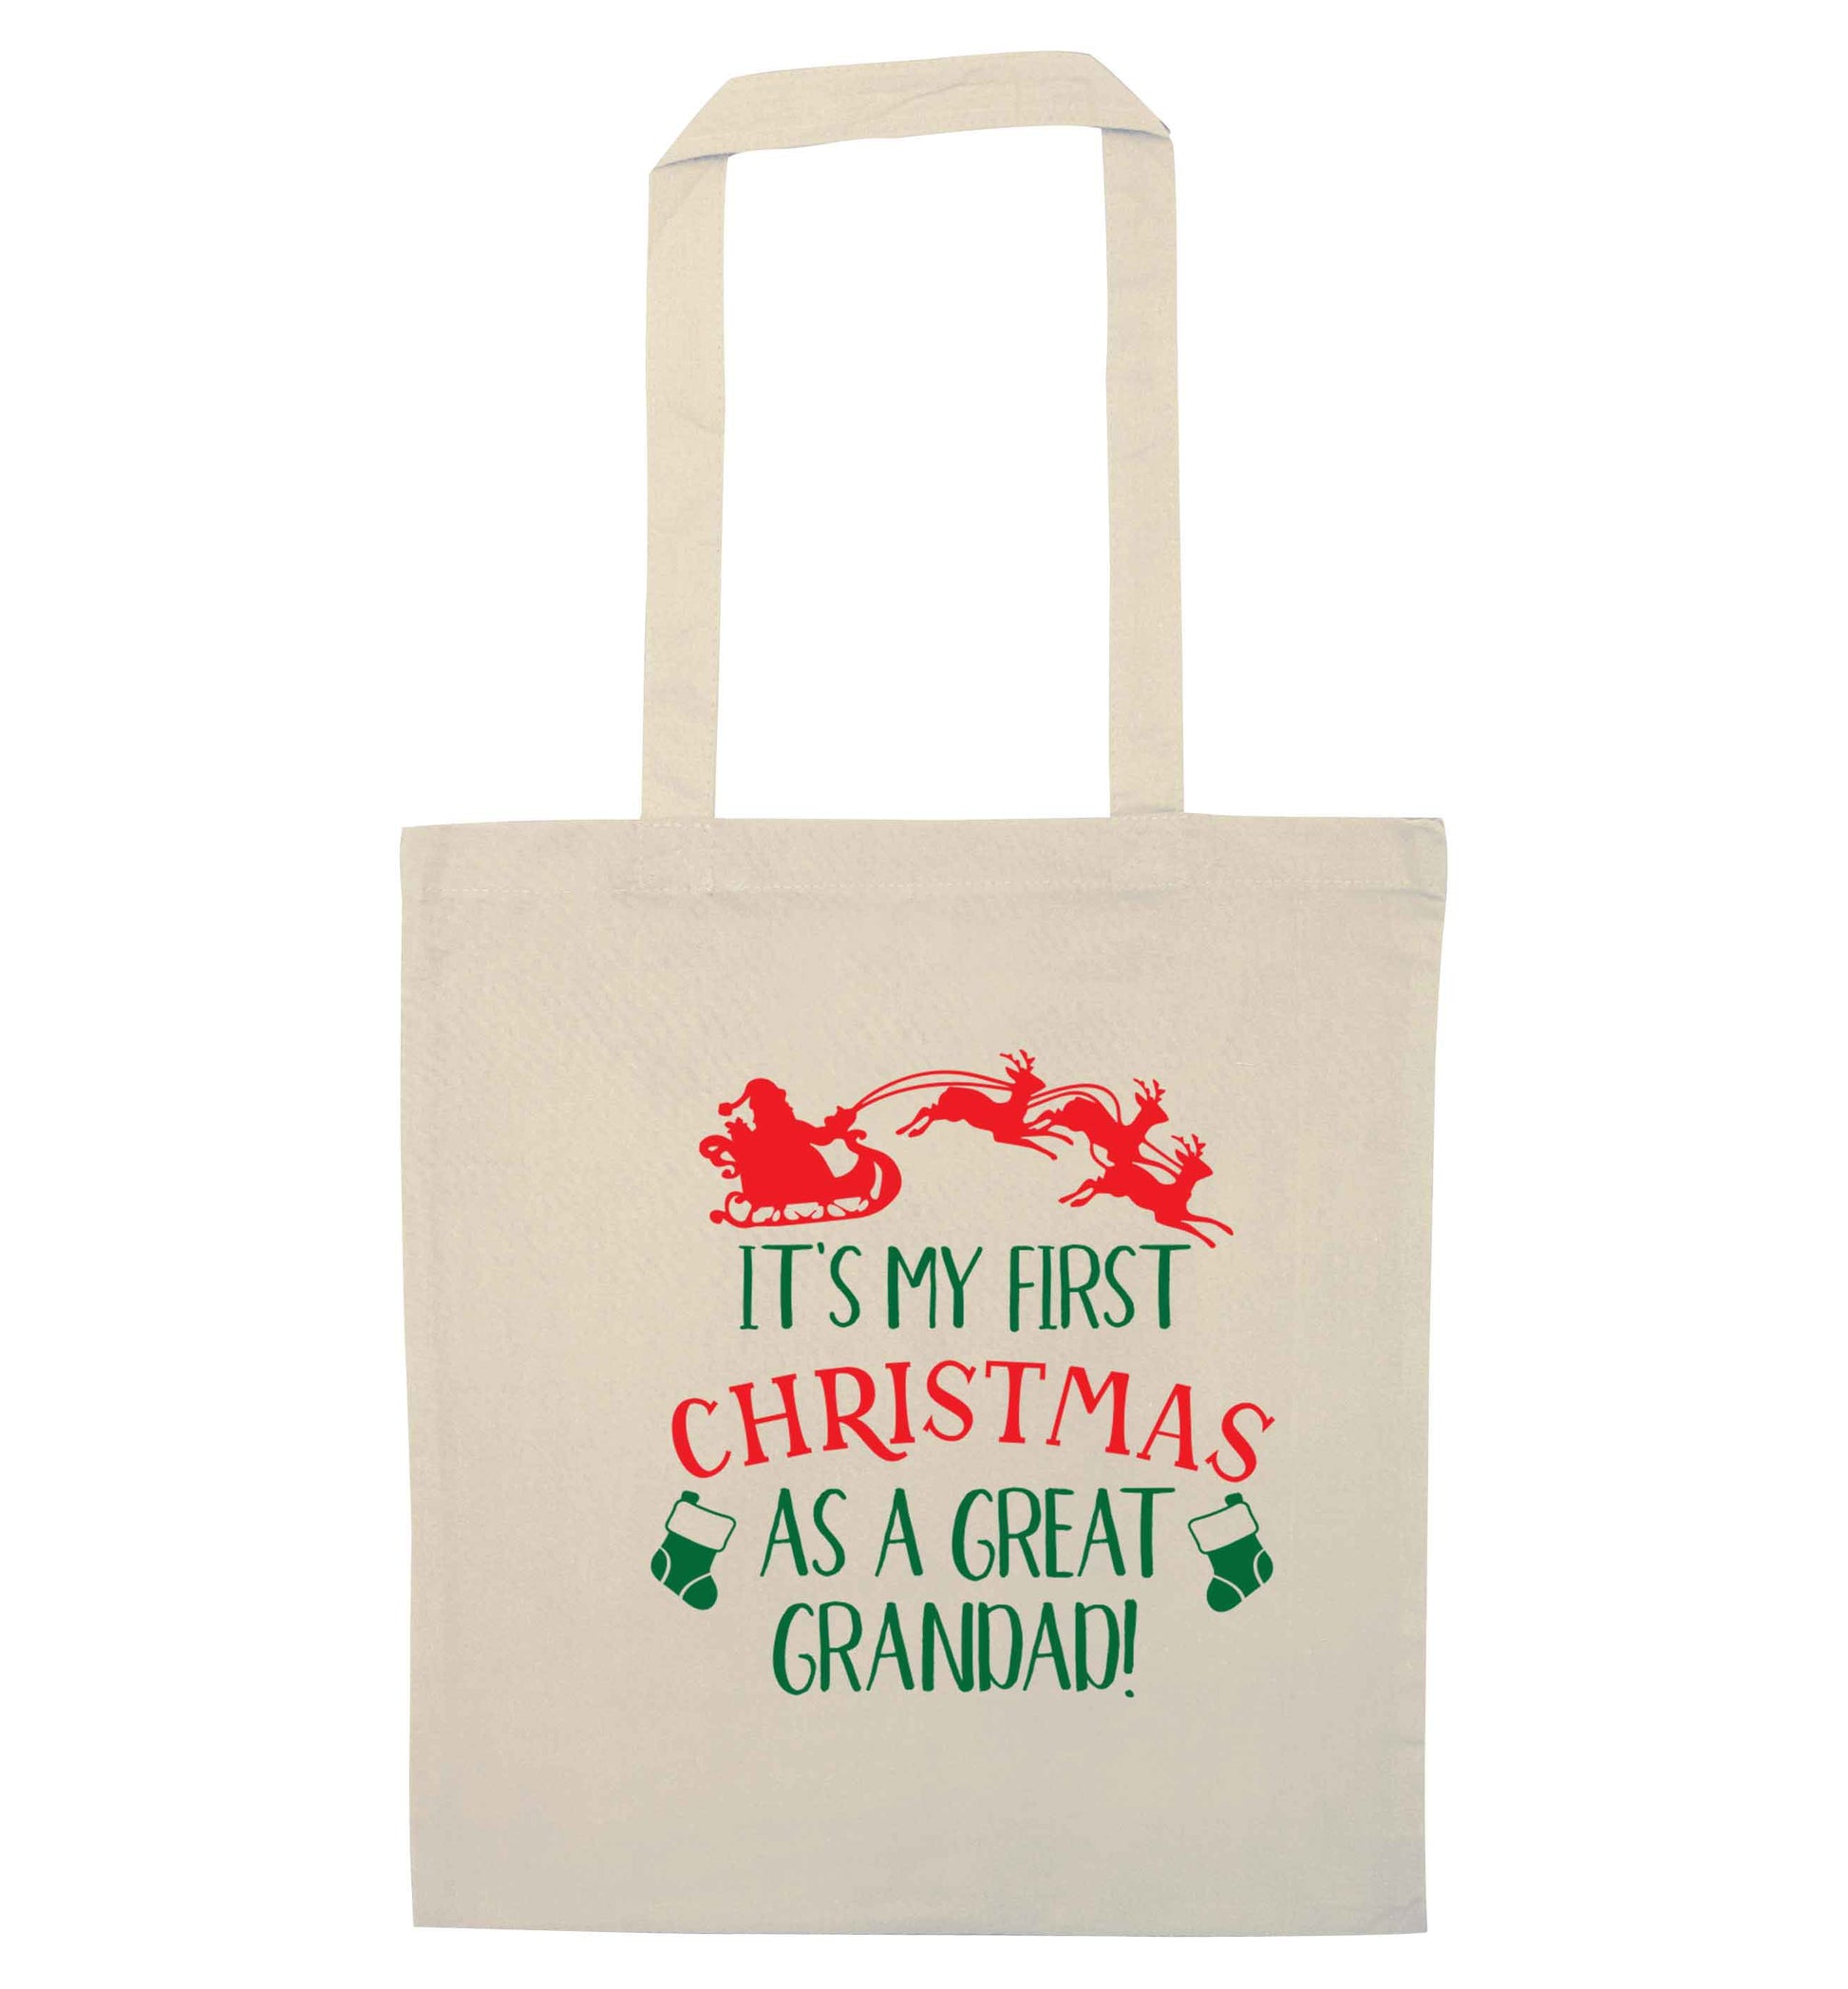 It's my first Christmas as a great grandad! natural tote bag